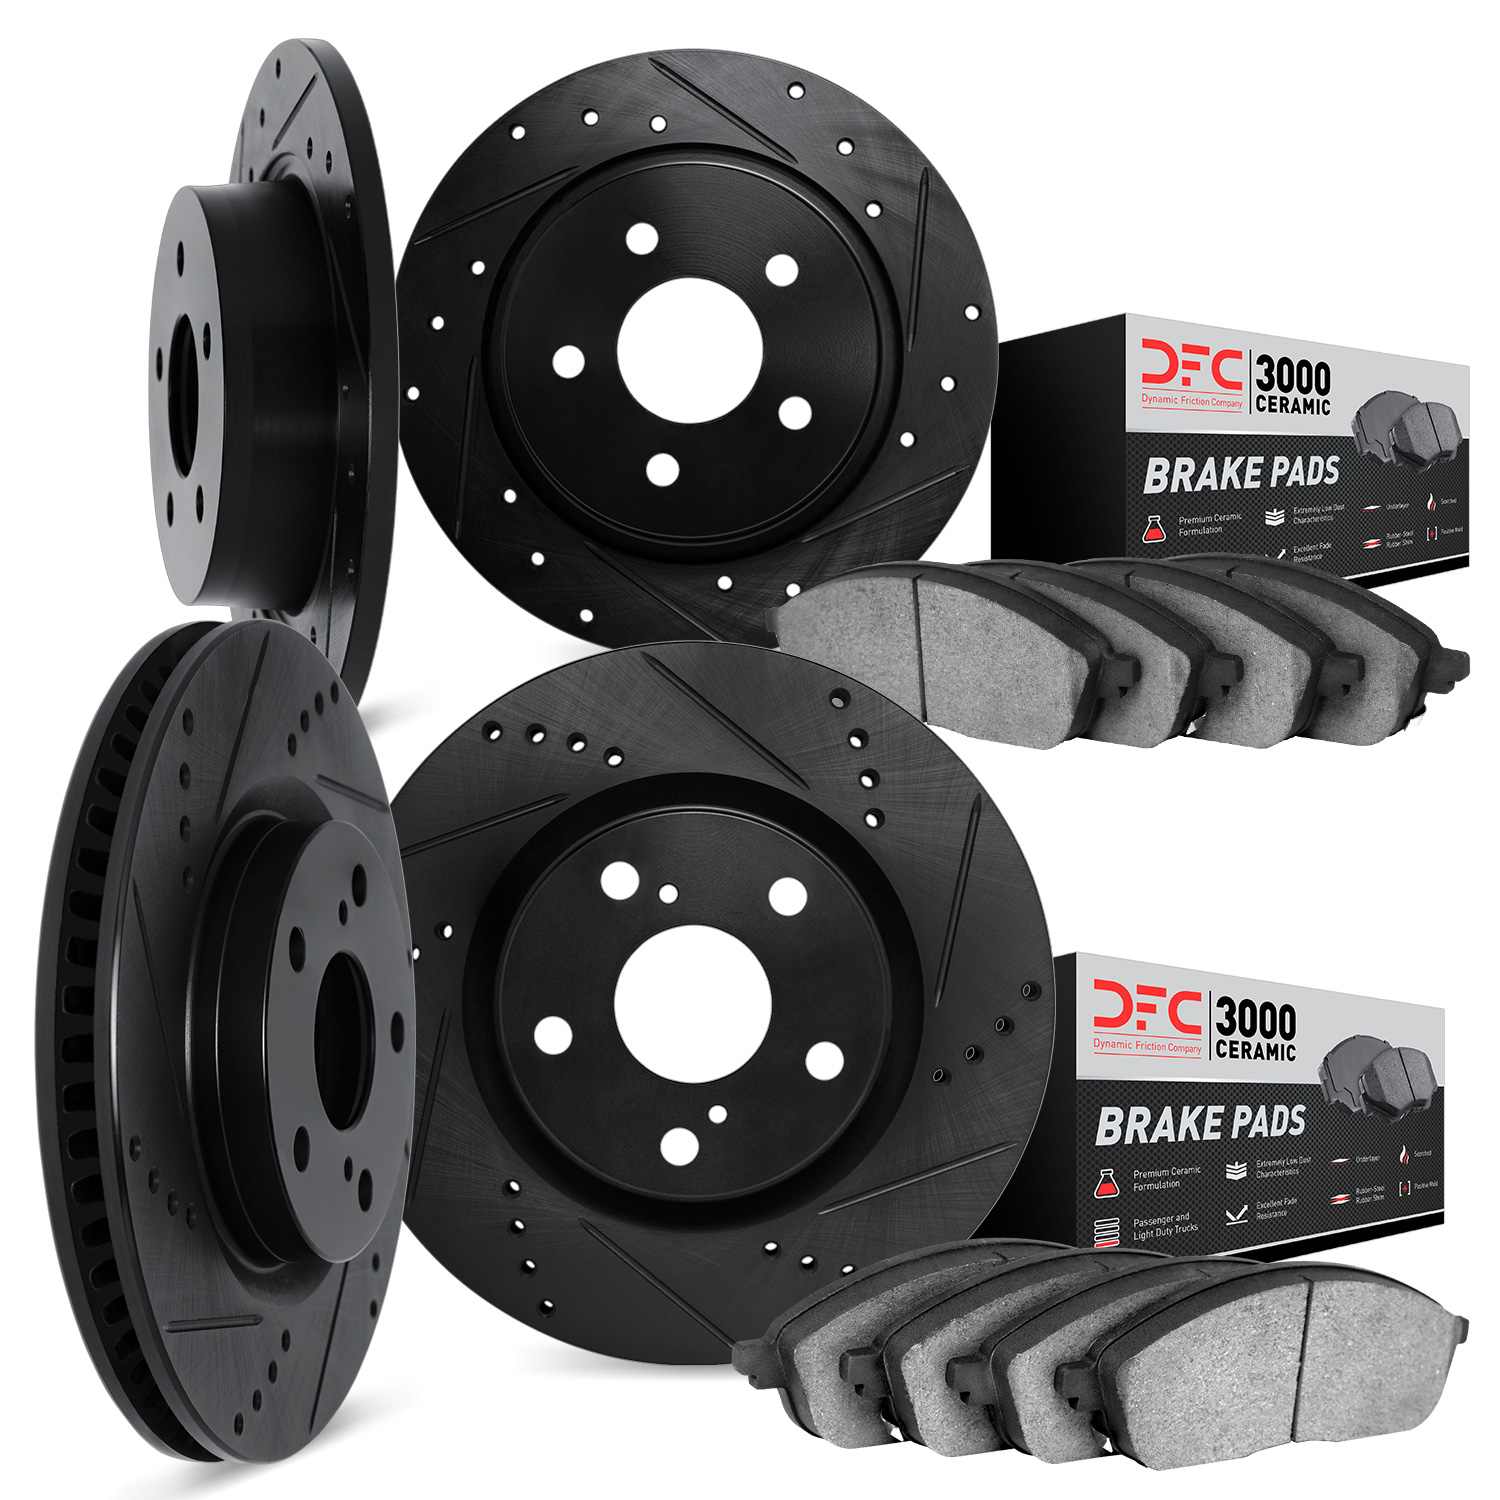 8304-42006 Drilled/Slotted Brake Rotors with 3000-Series Ceramic Brake Pads Kit [Black], 1999-2004 Mopar, Position: Front and Re